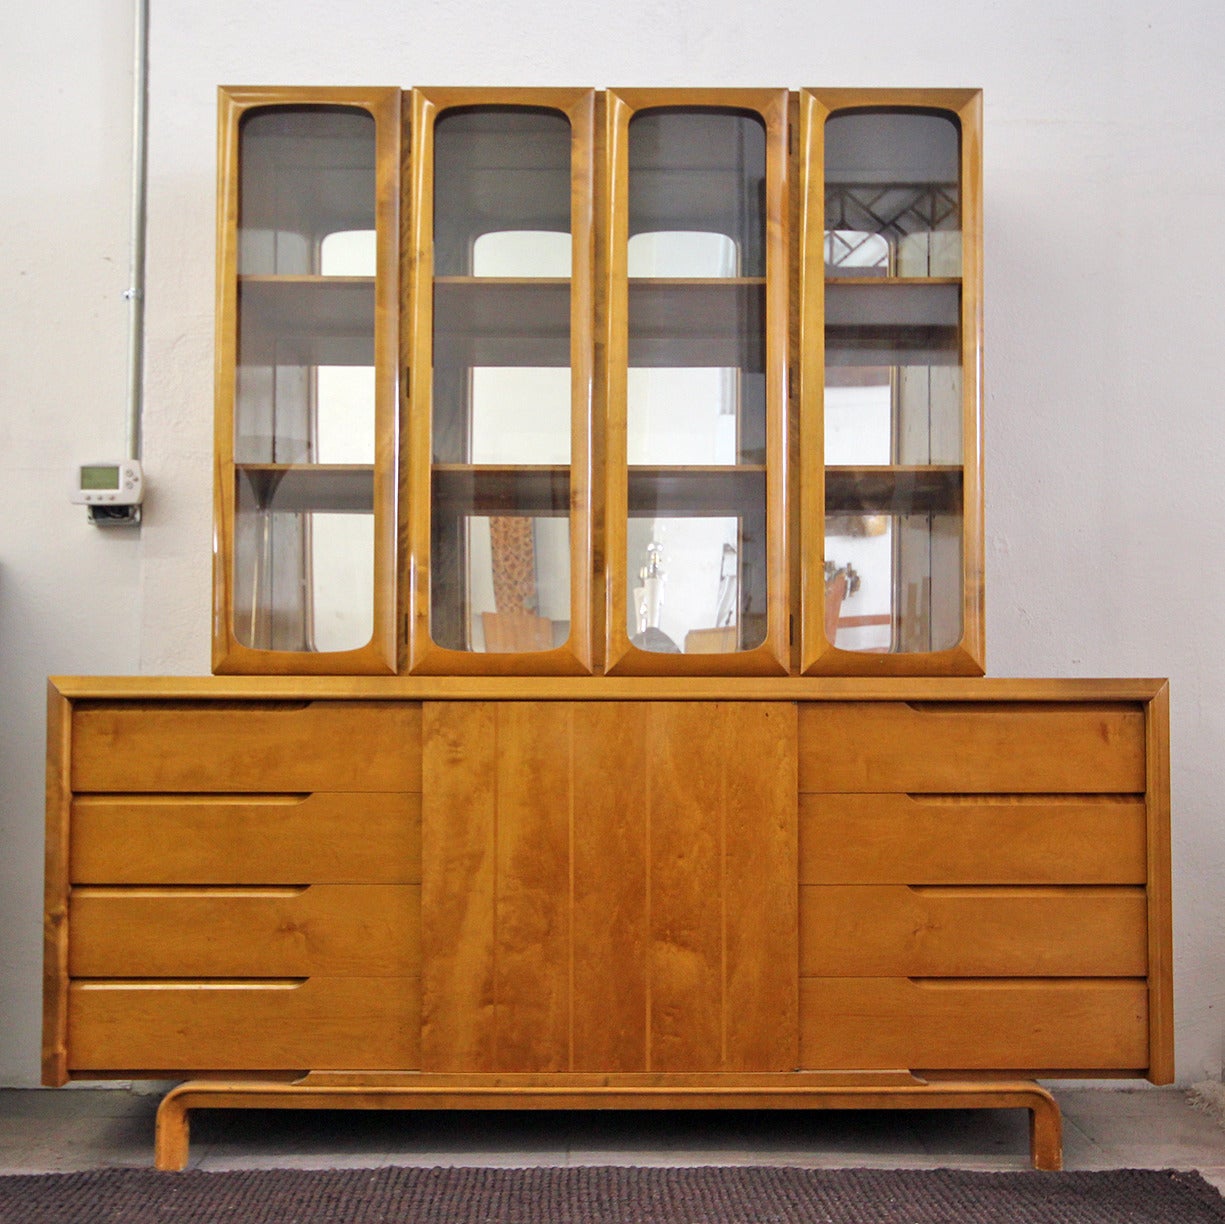 Flamed maple wall unit by Edmond Spence, made in Sweden. The wall unit is super clean and in excellent condition. 
This particular piece consists of two pieces, and the glass hutch top floats on the bottom. The bottom piece measures: 72